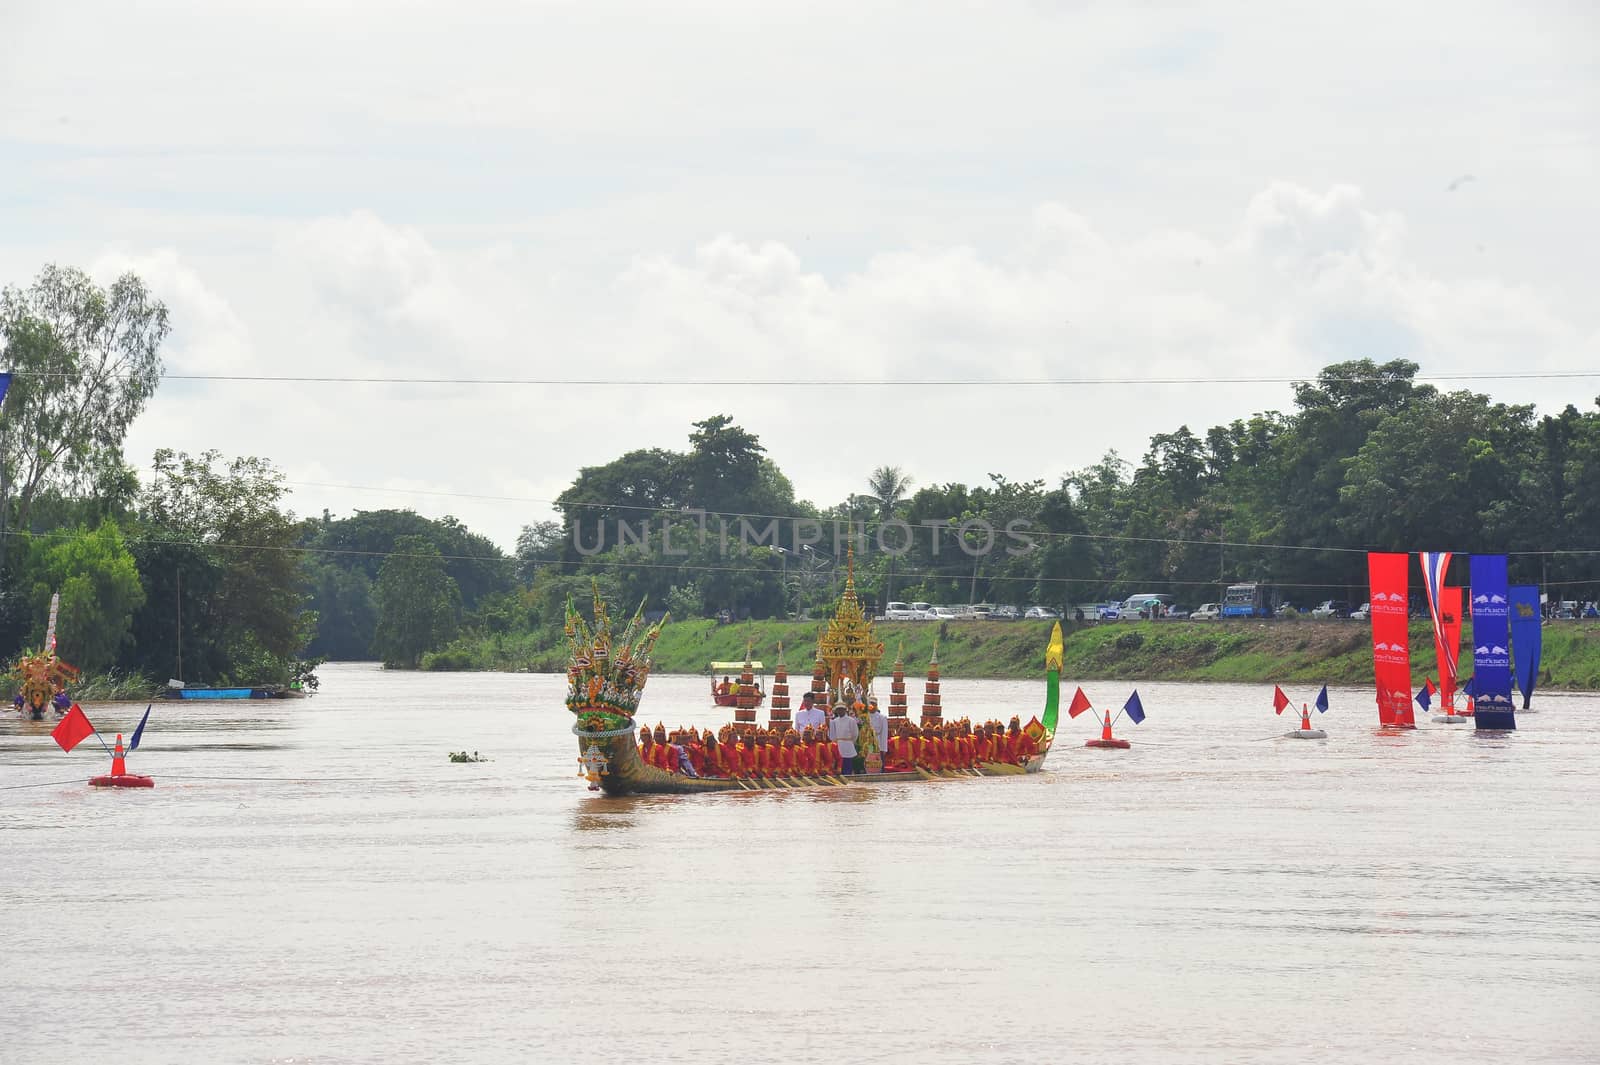 Phichit boat racing is a traditional event of long standing. by ideation90